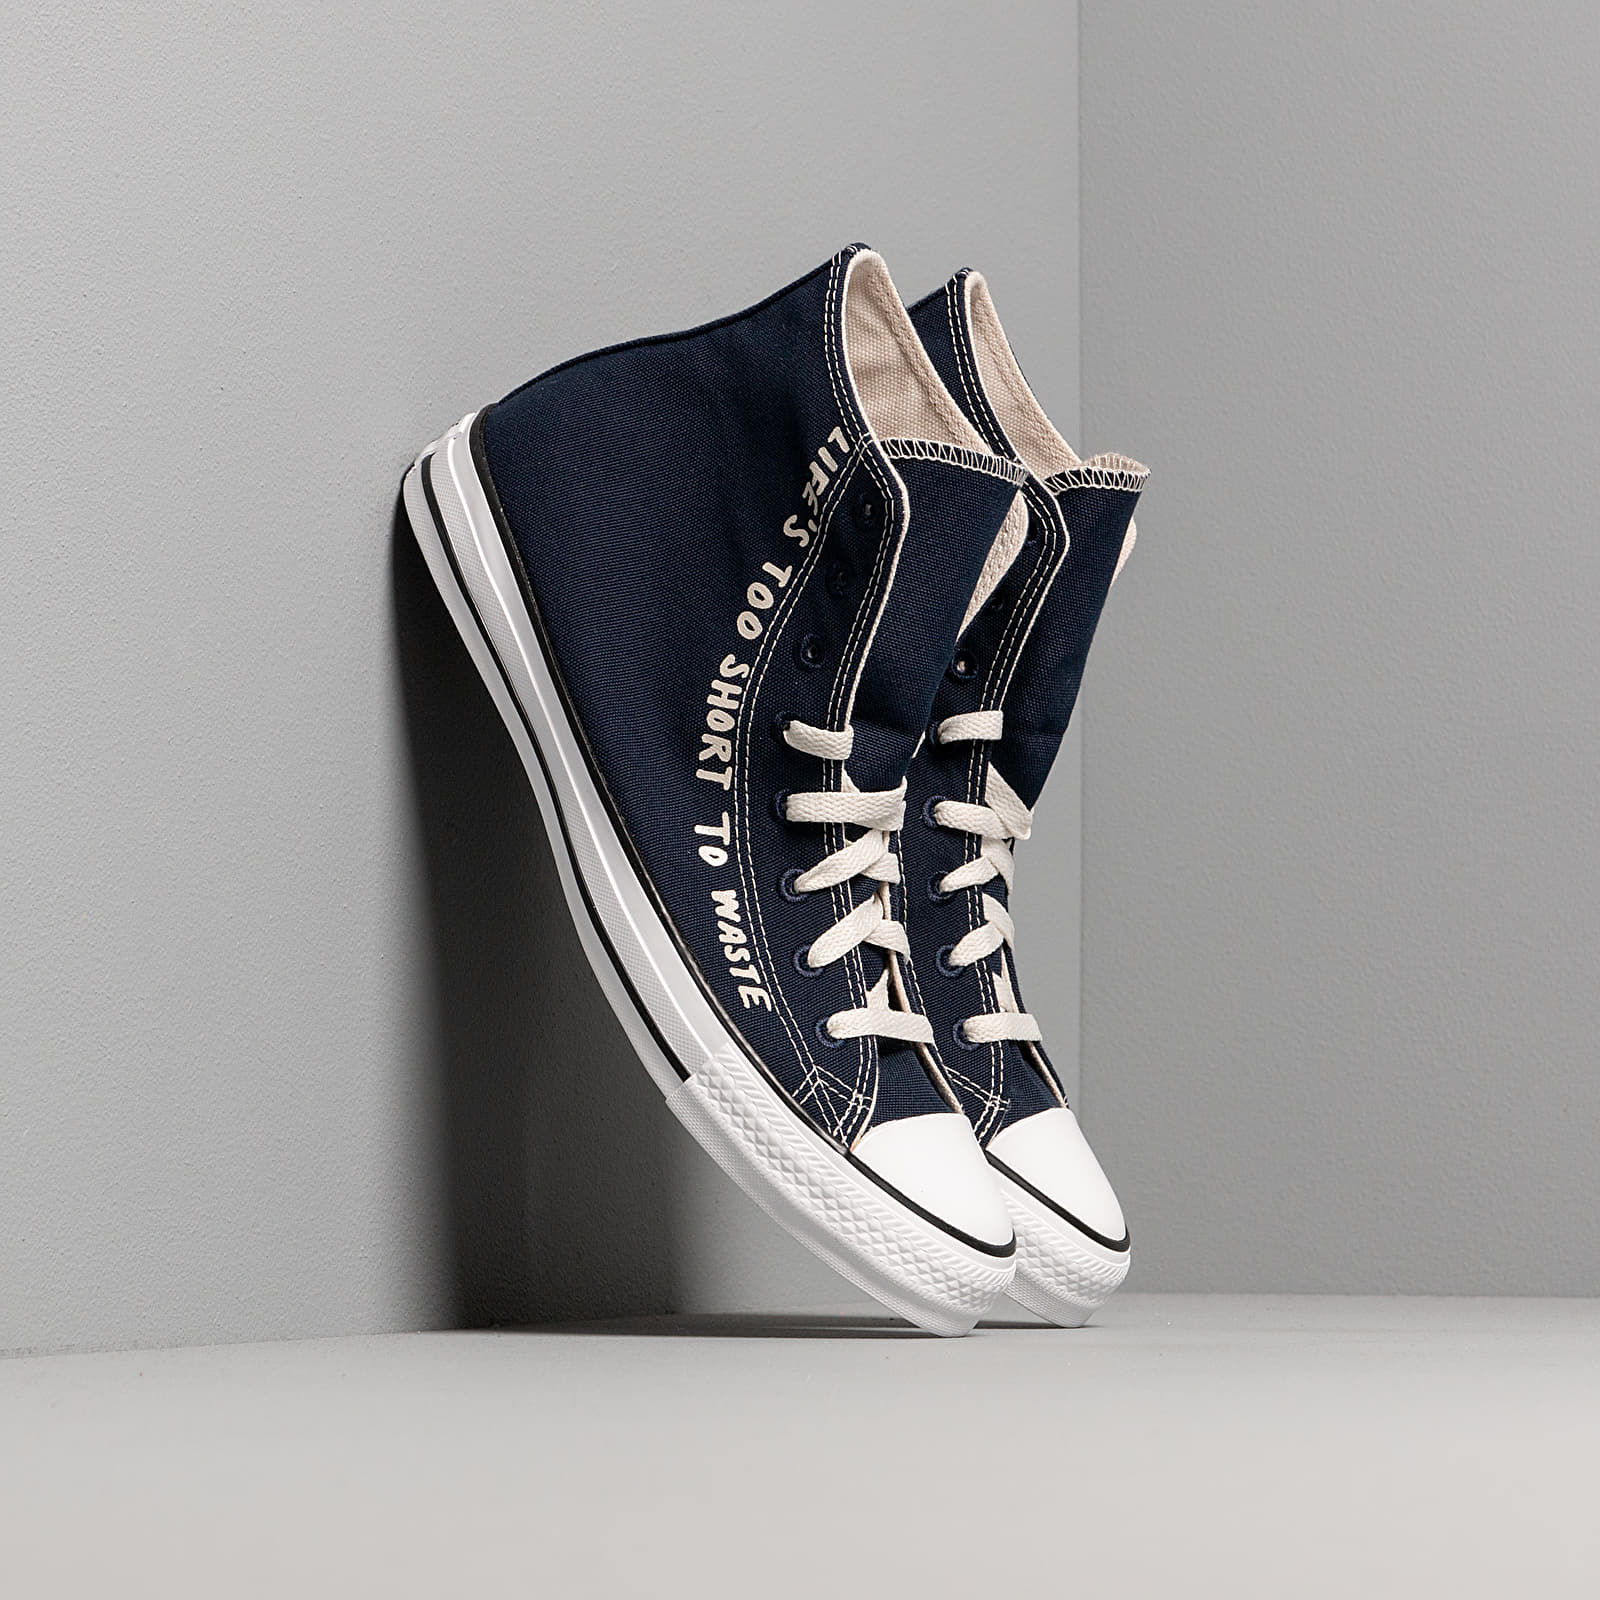 Chaussures et baskets homme Converse Chuck Taylor All Star Hi Renew Obsidian/ Egret/ White